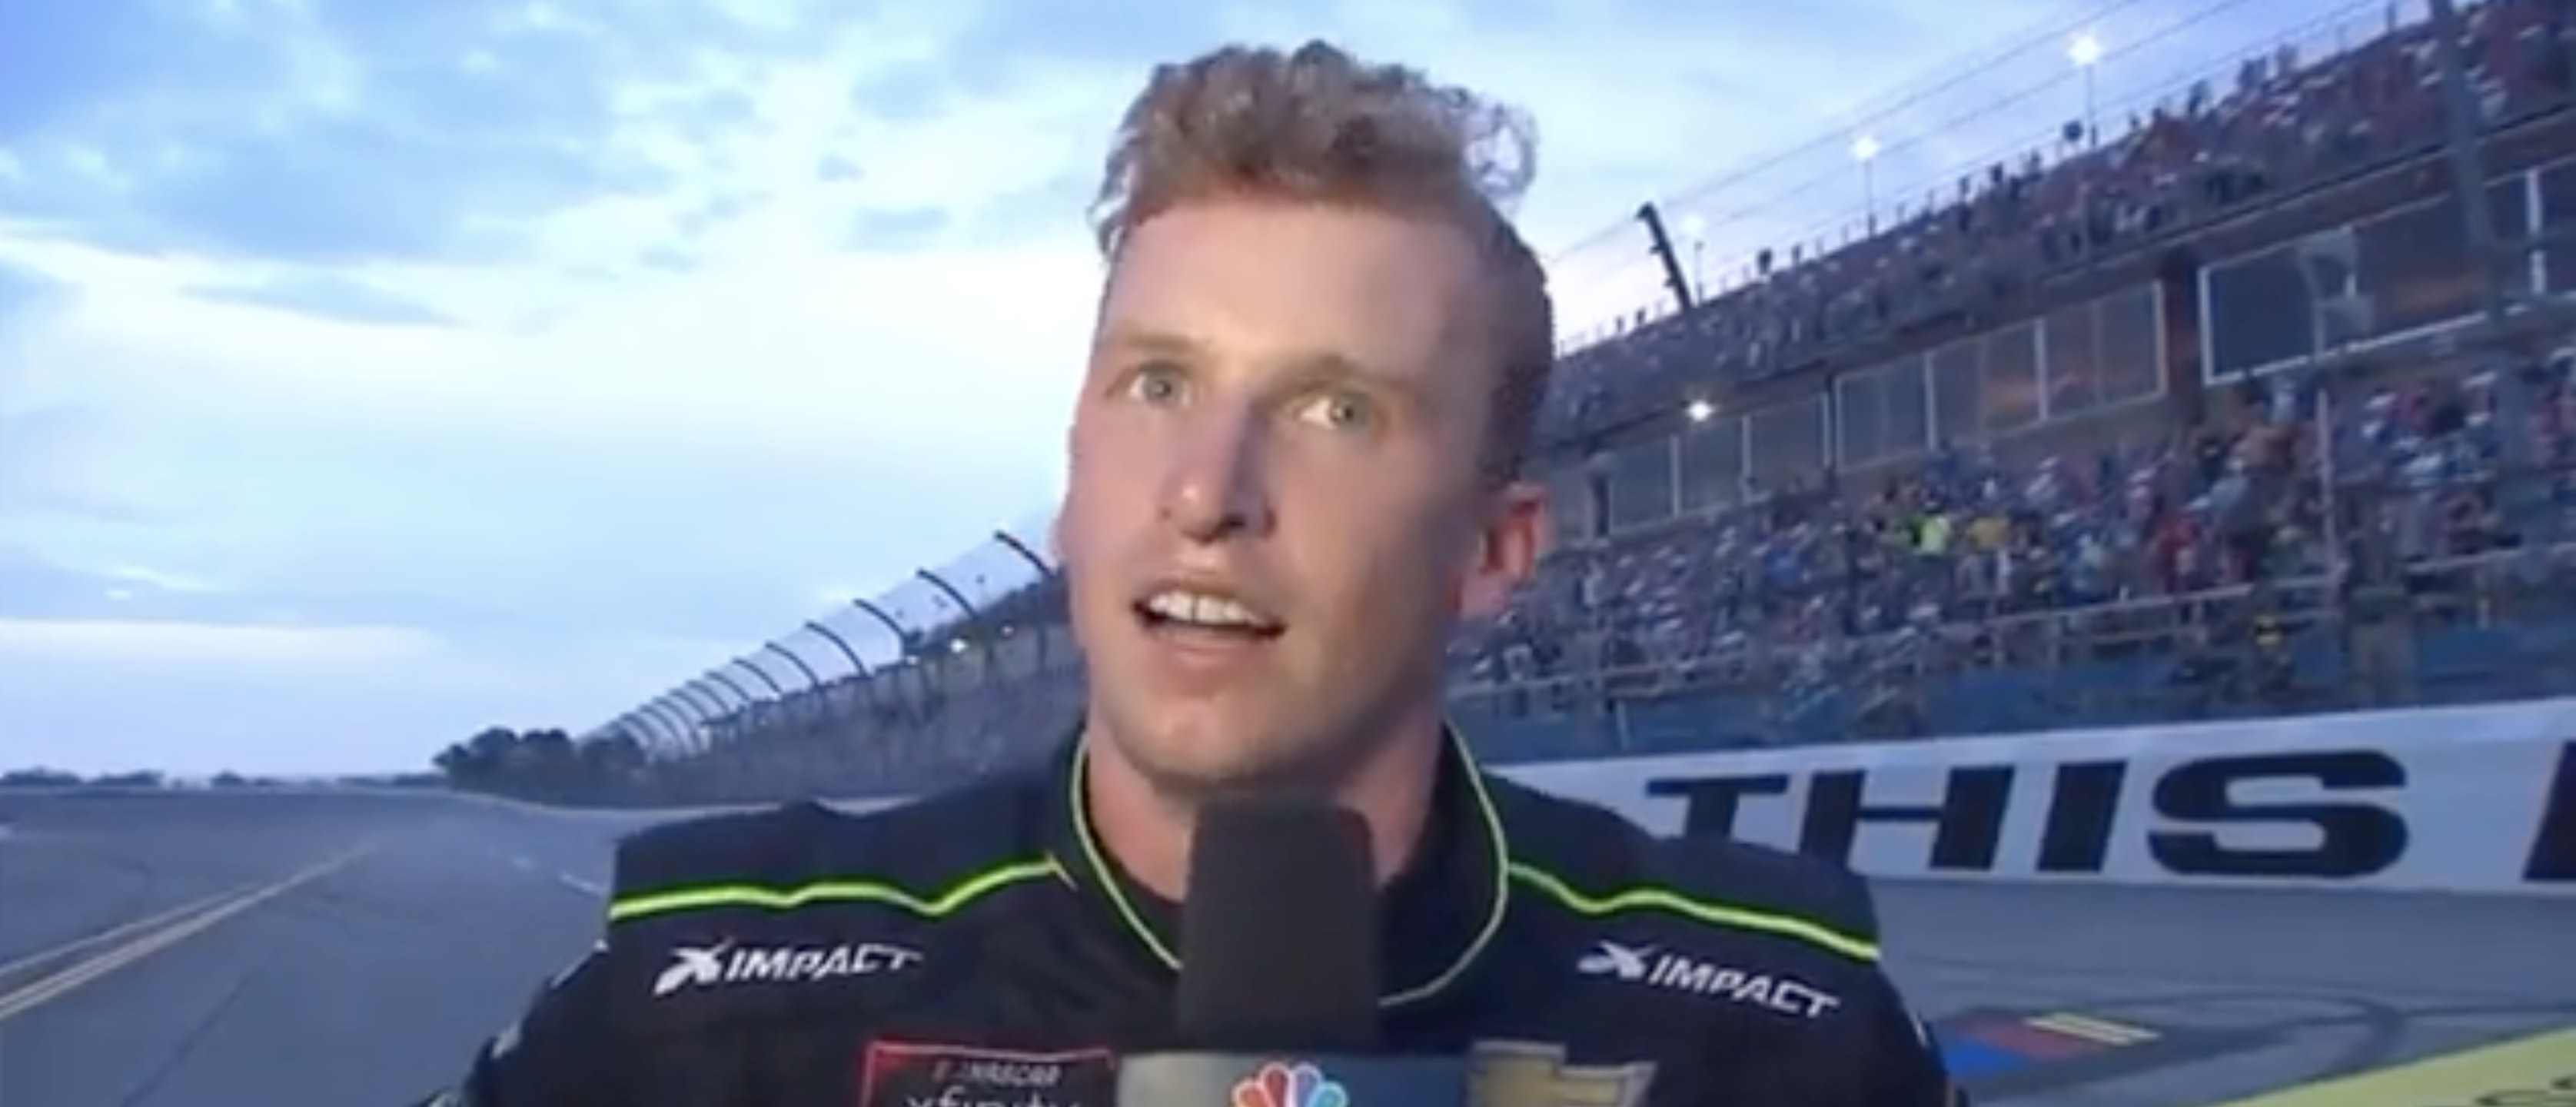 NASCAR Driver Brandon Brown Says He Can’t Get Sponsors Because Of ‘Let’s Go Brandon’ Chant